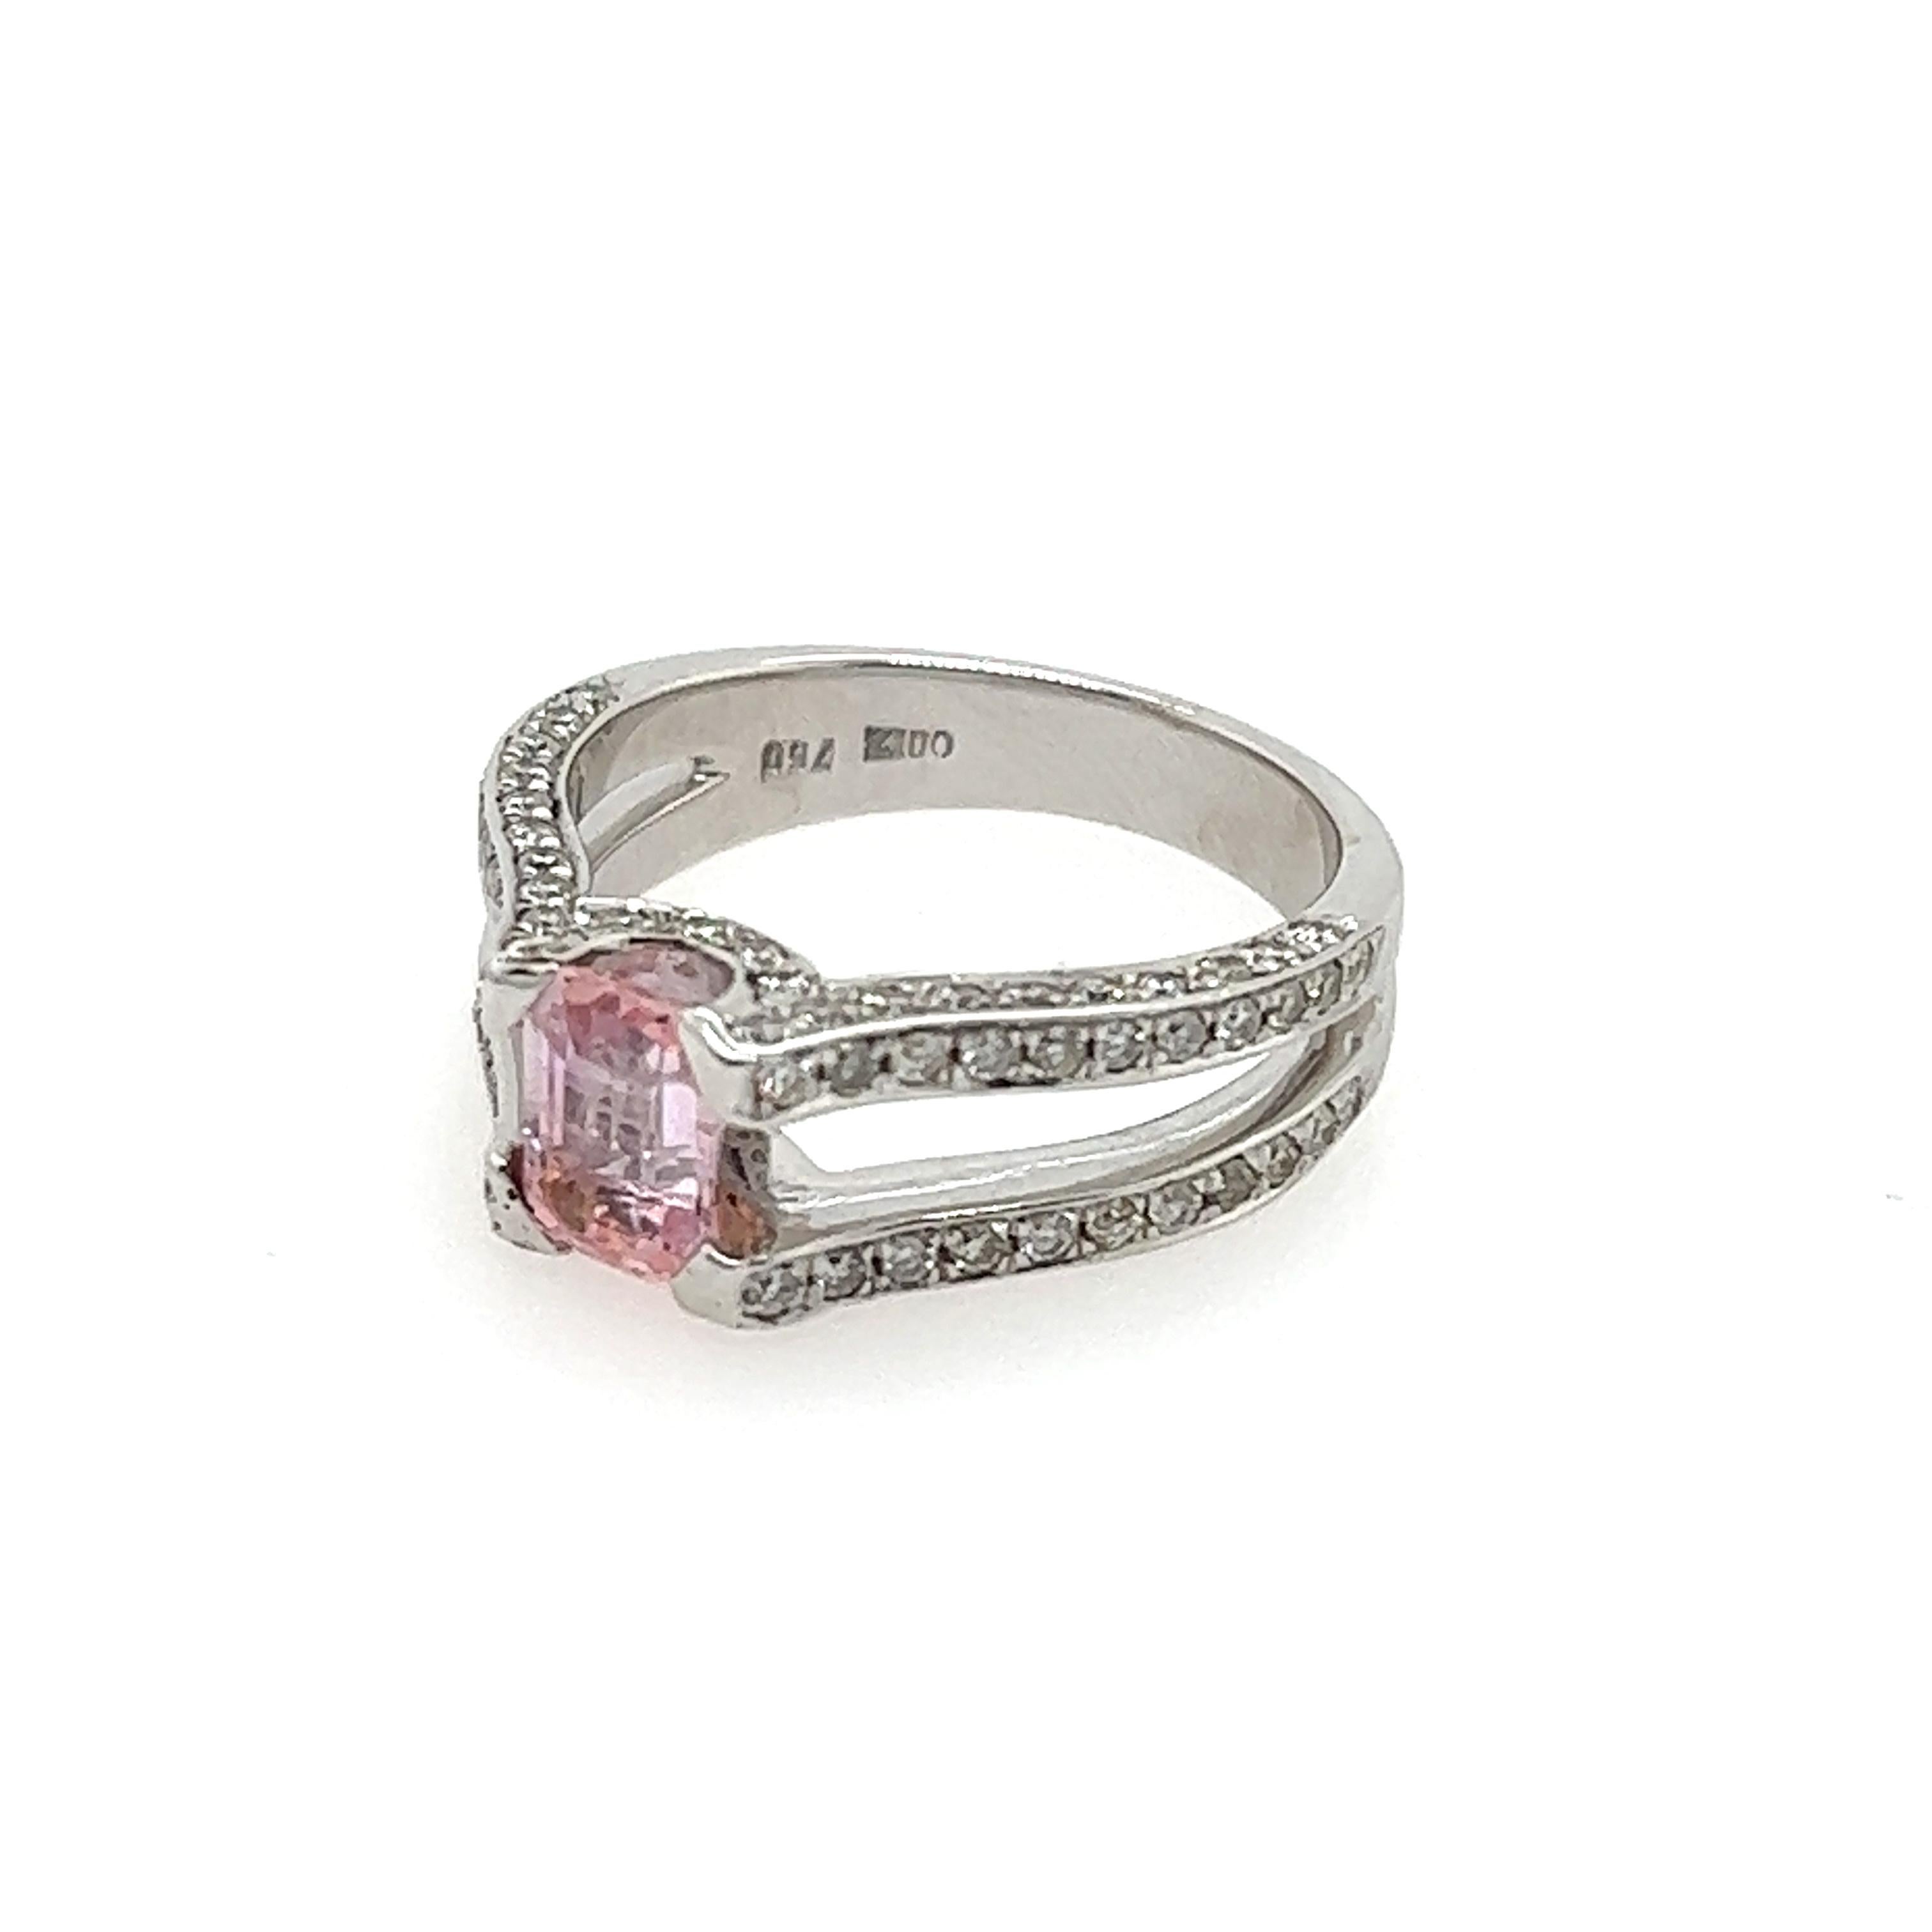 1.01 Carat Emerald Cut Pink Sapphire and Diamond Ring in 18k White Gold In New Condition For Sale In London, GB